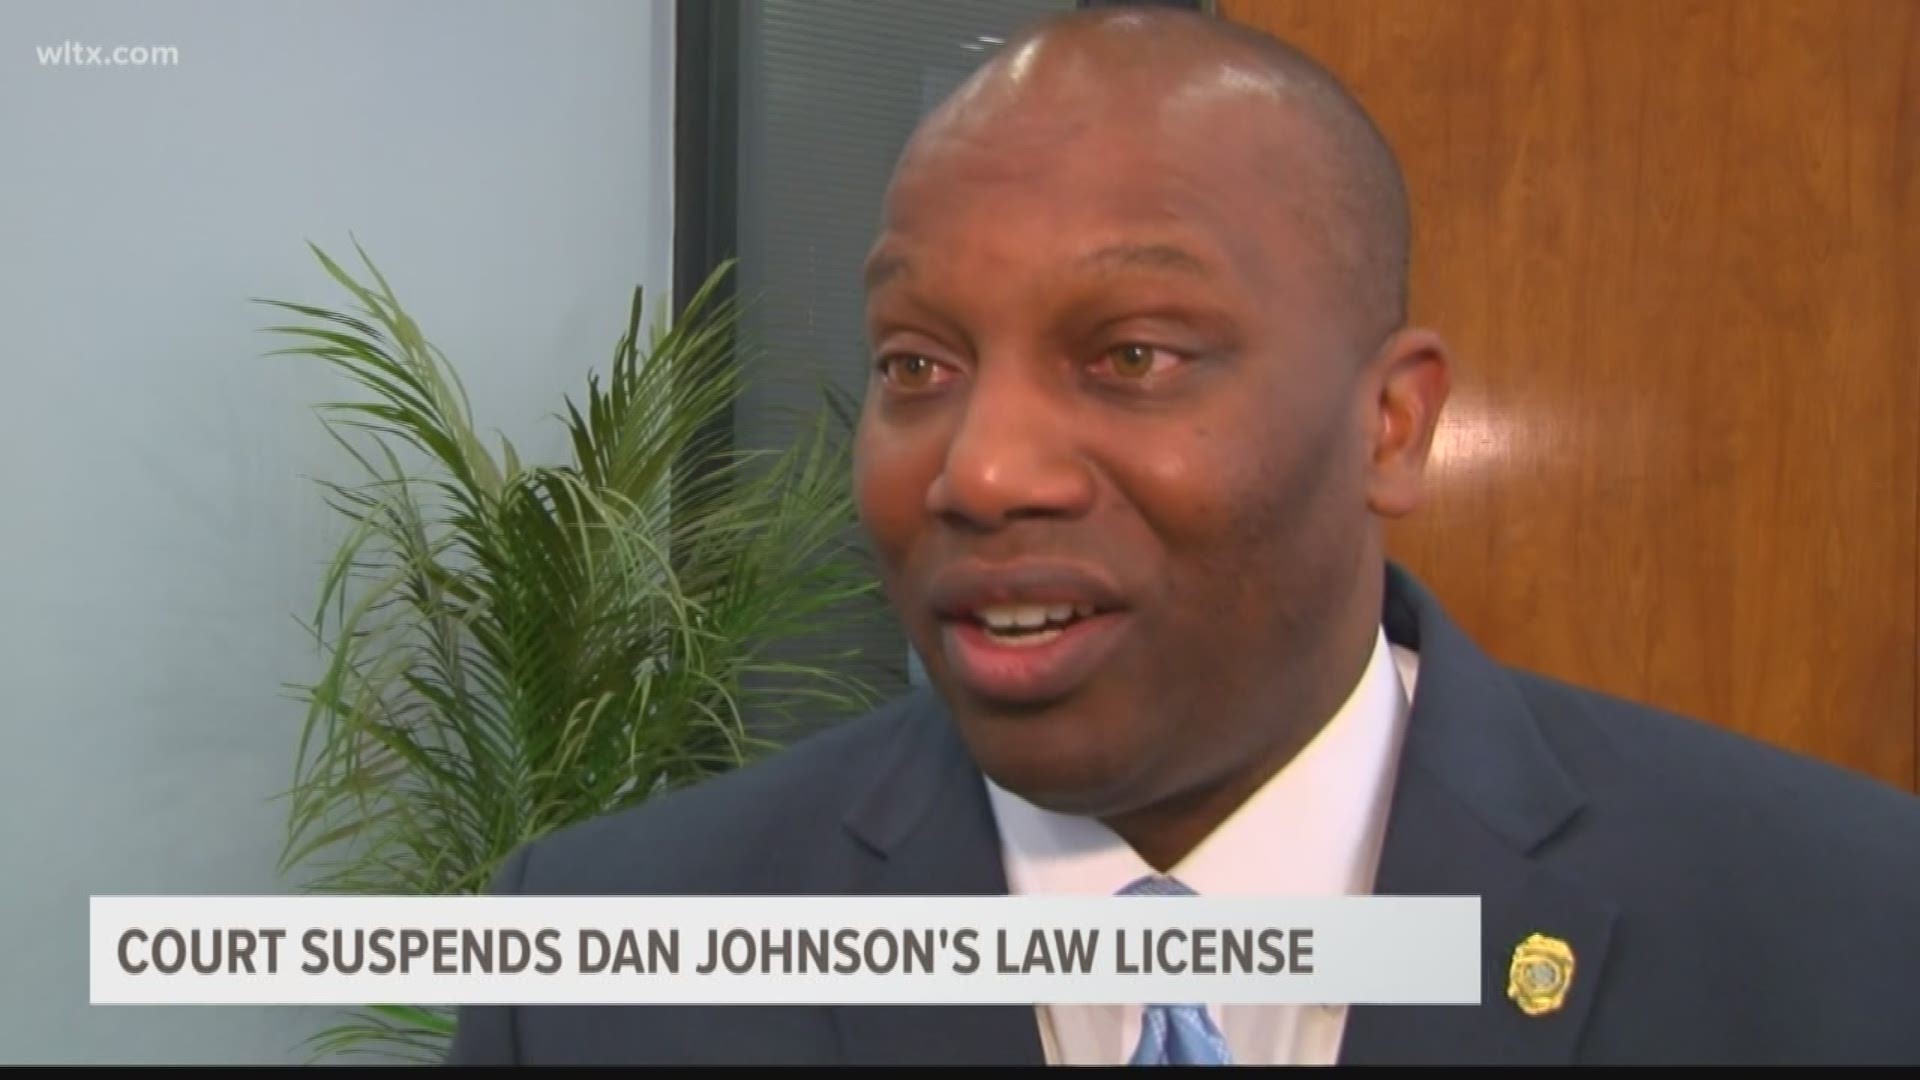 Court suspends former solicitor Dan Johnson's law license